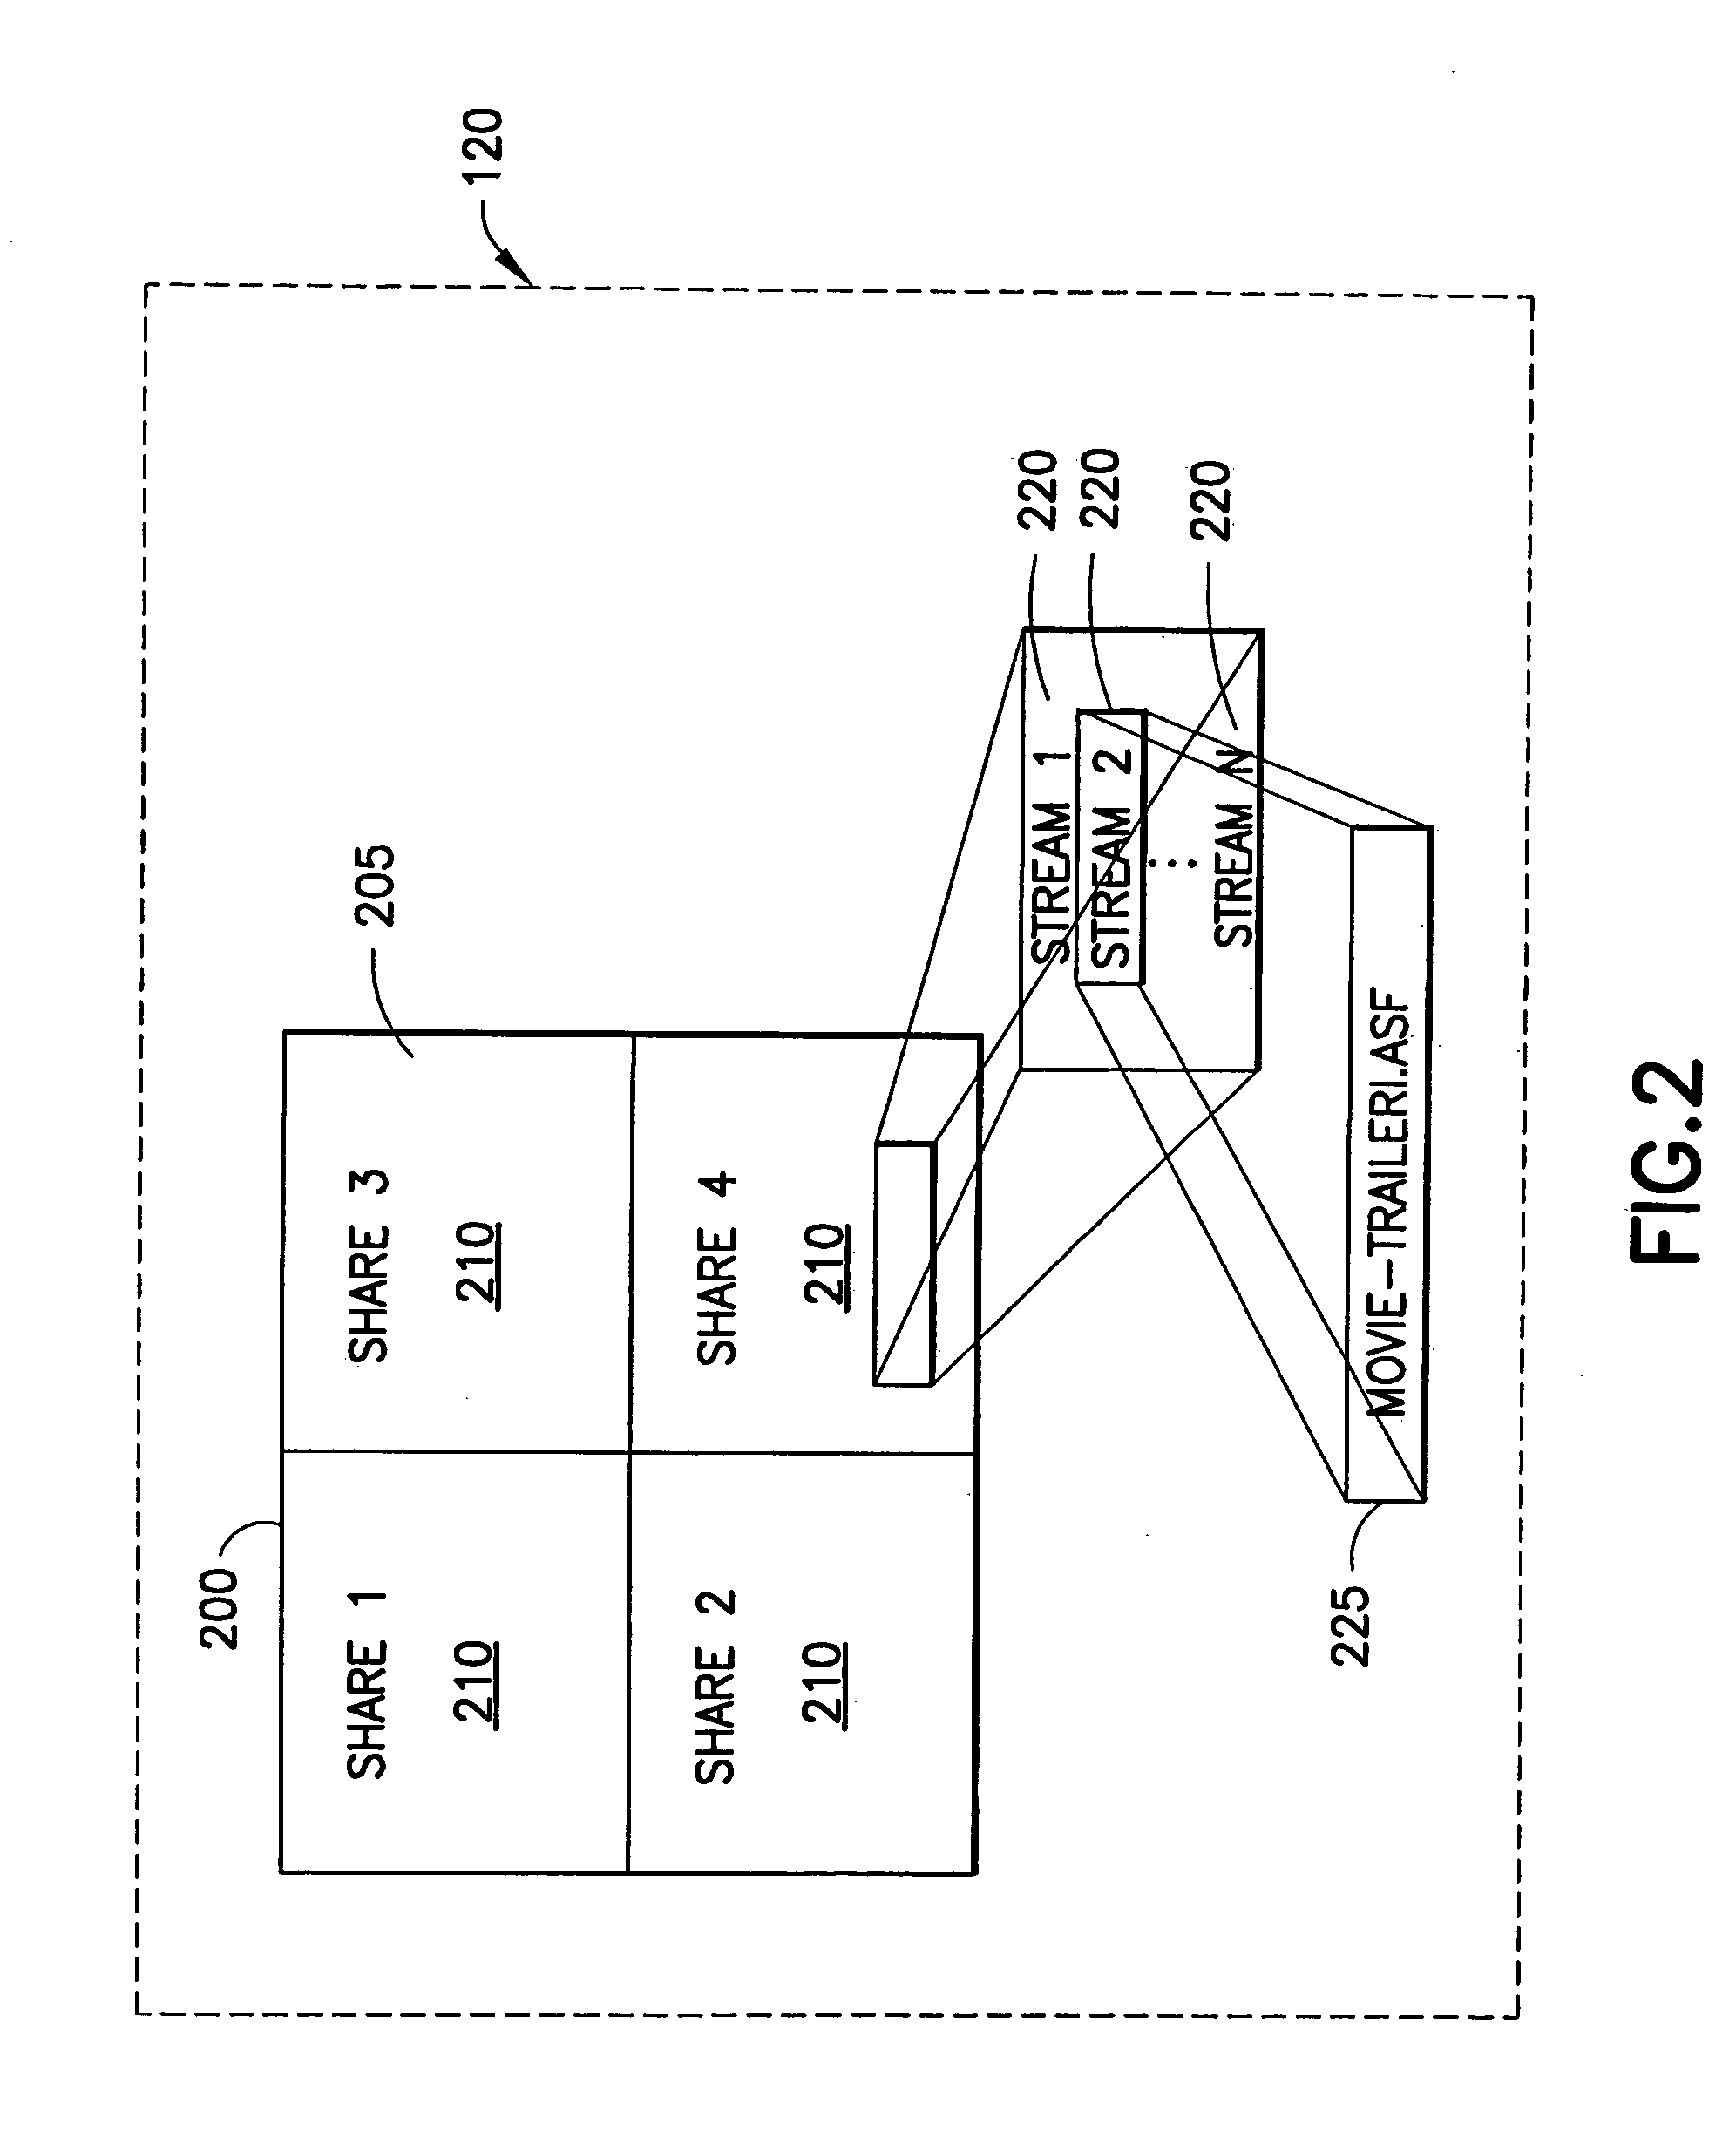 System and method for monitoring delivery of digital content, including streaming media